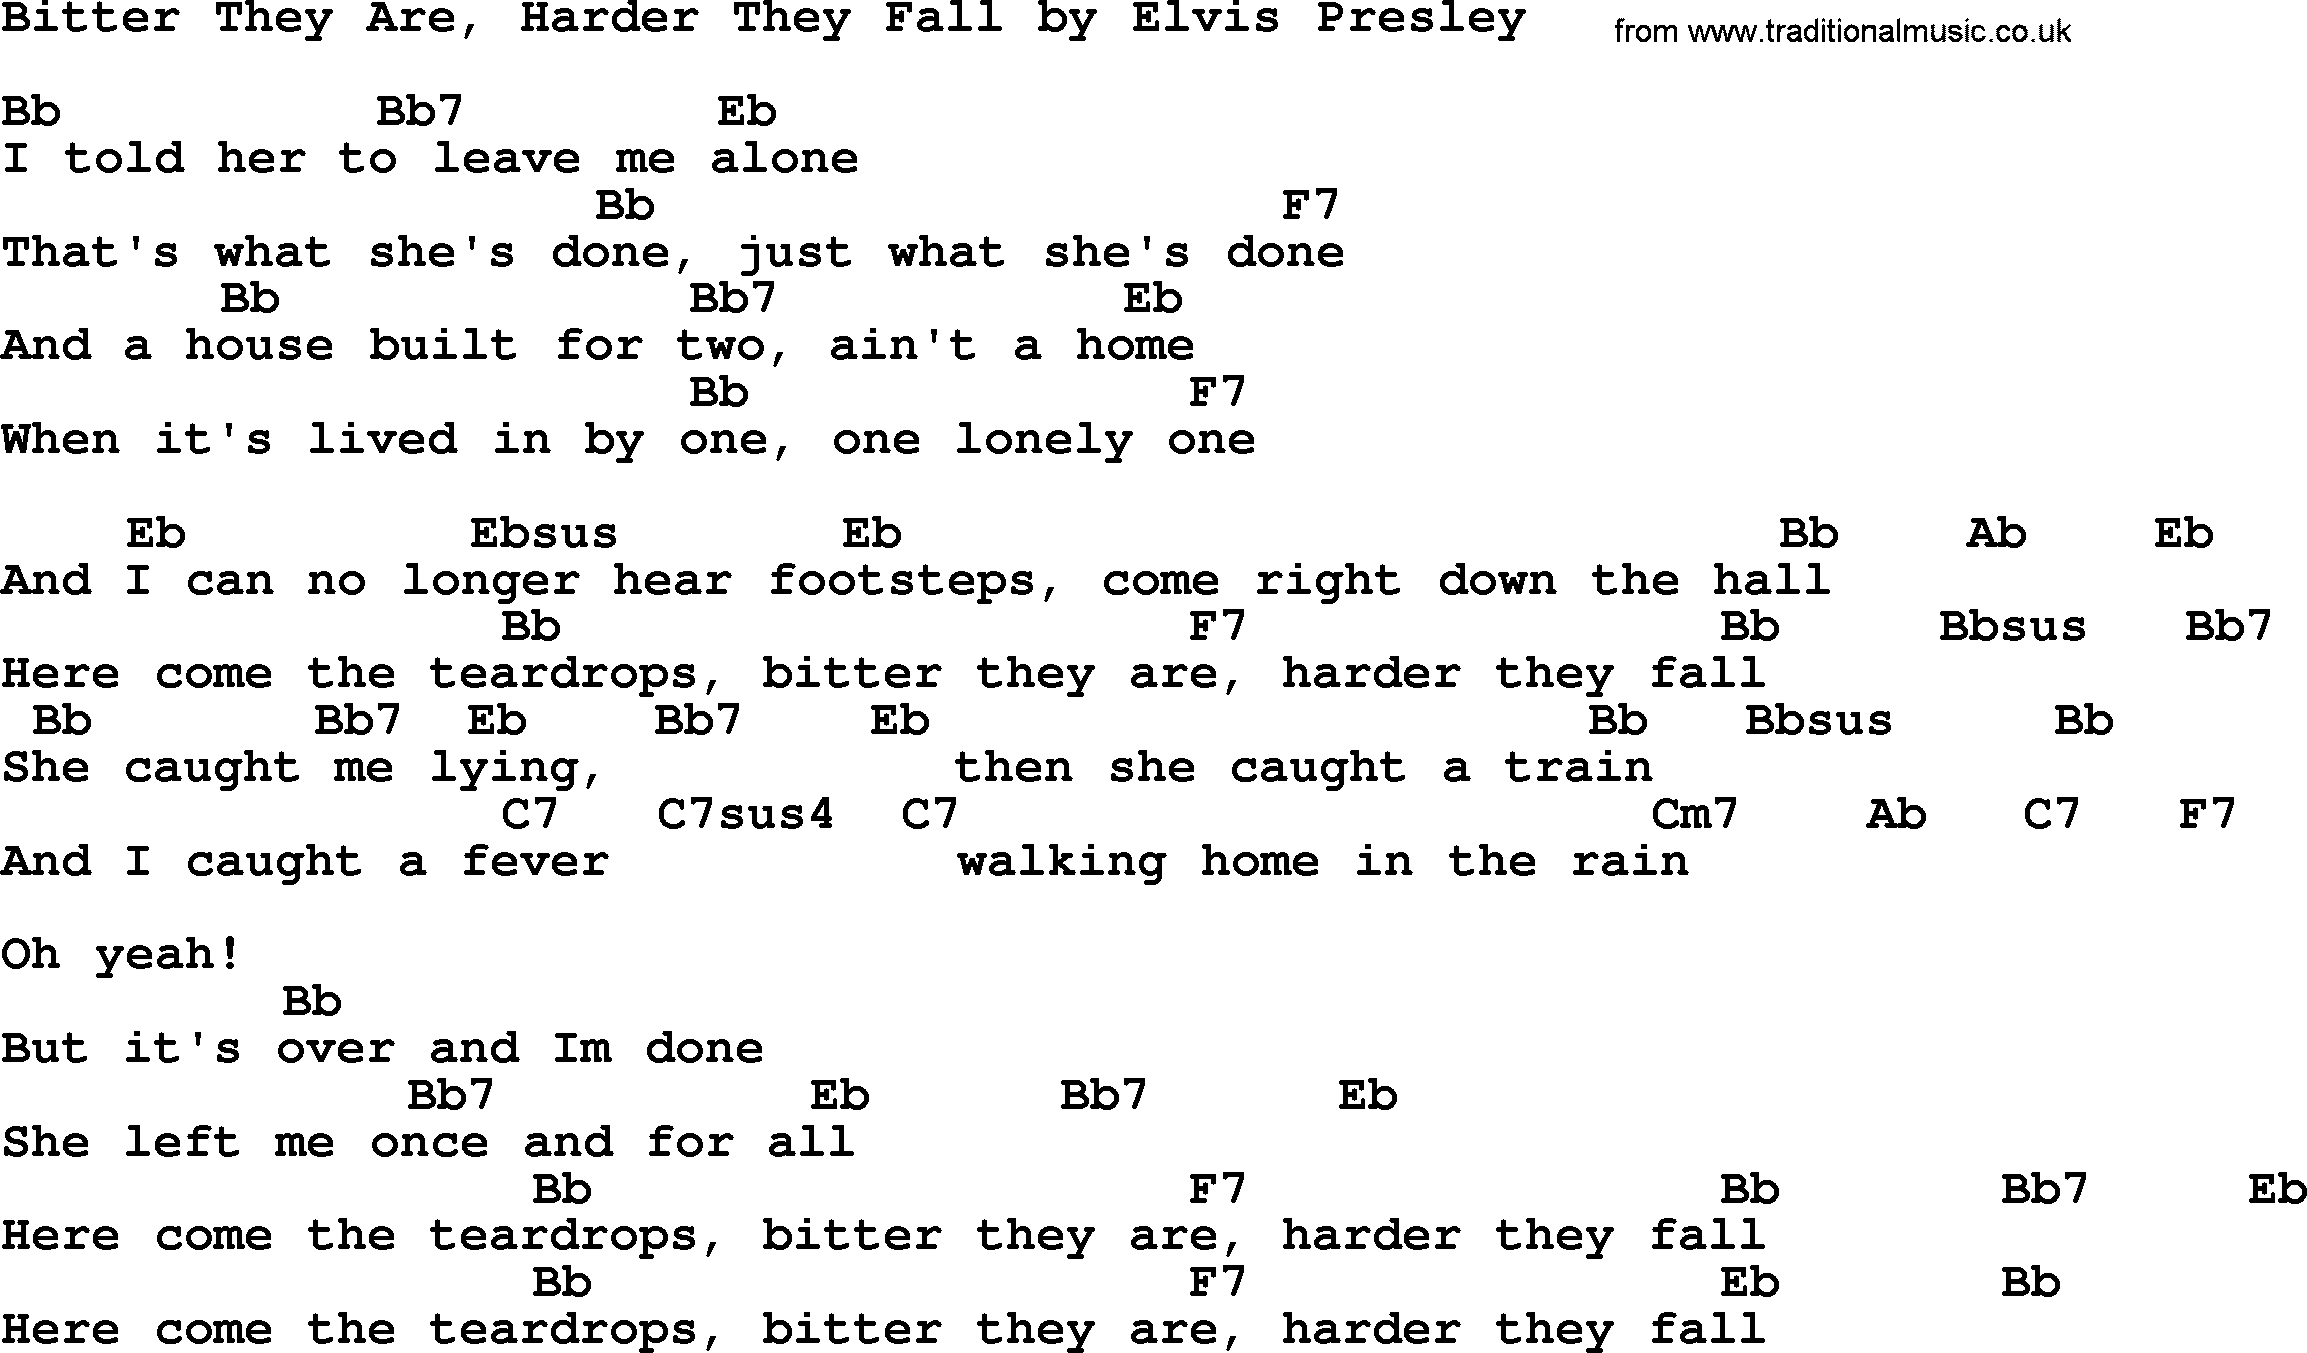 Bitter They Are, Harder They Fall, by Elvis Presley - lyrics and chords